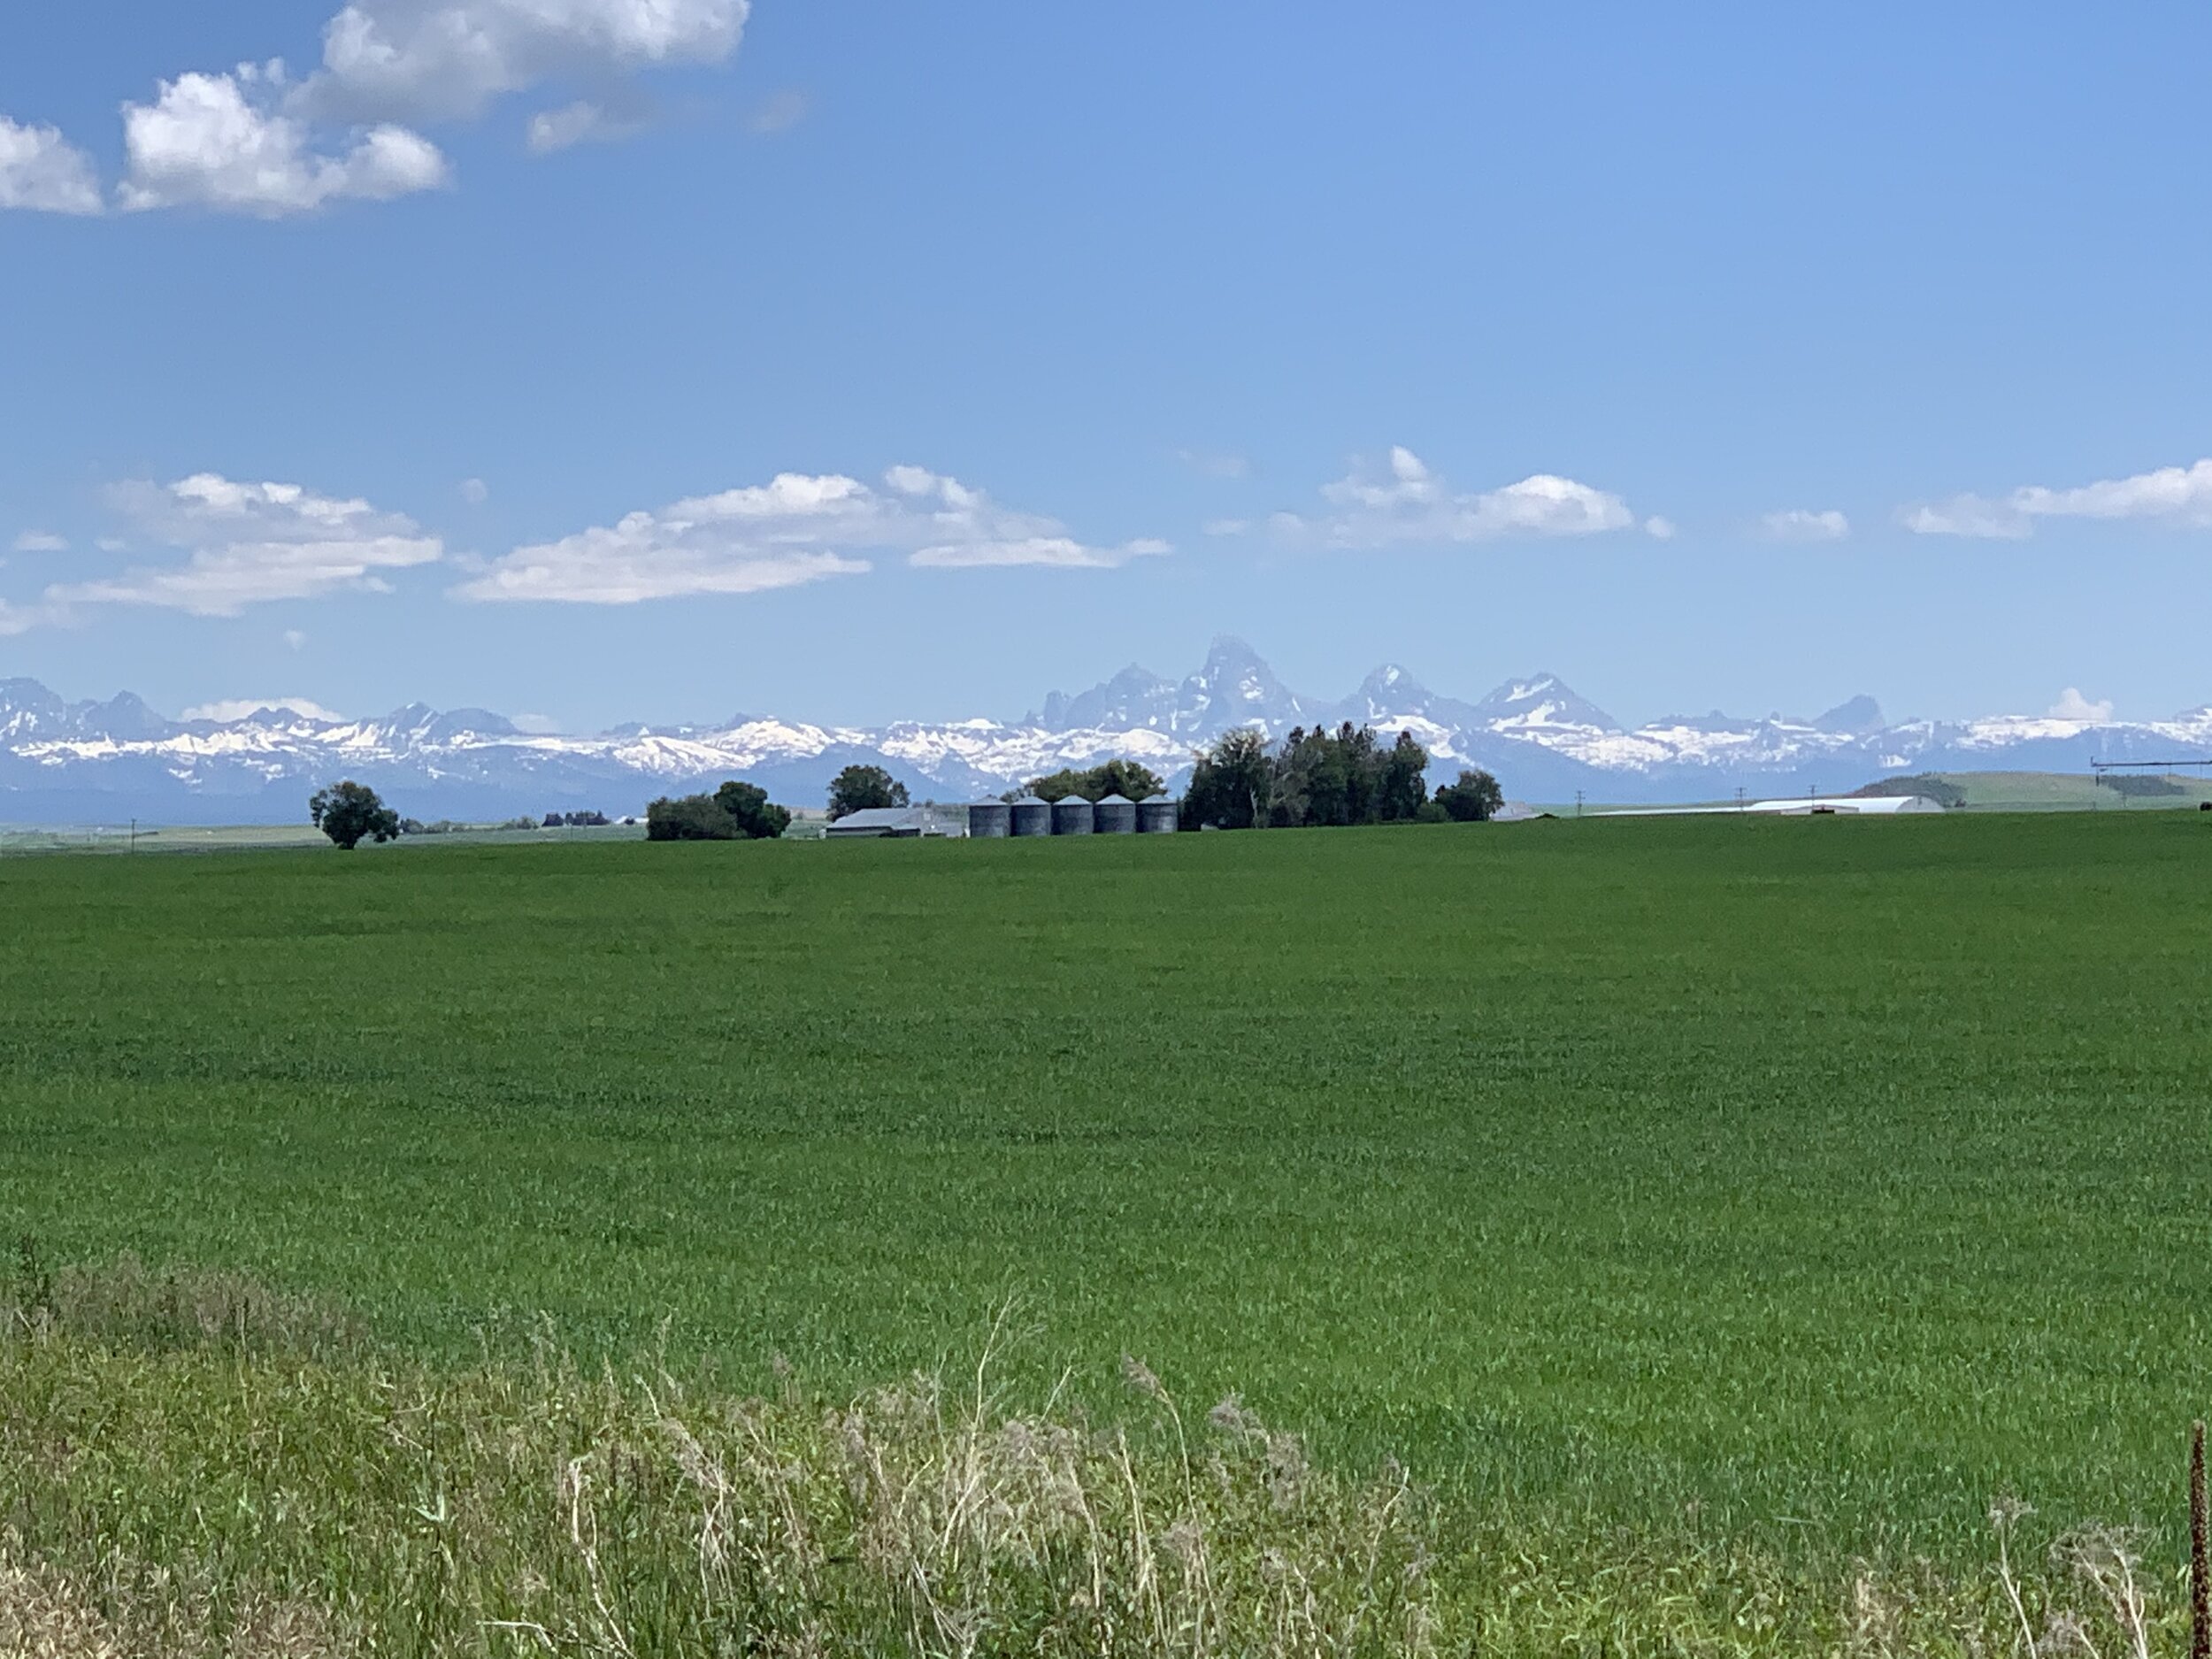  We’ve stayed at some really beautiful campsites. In the small town of Ashton, ID, our campsite backed up against a lovely private farm. We also just happened to have a view of the Grand Tetons about 40 miles away. 